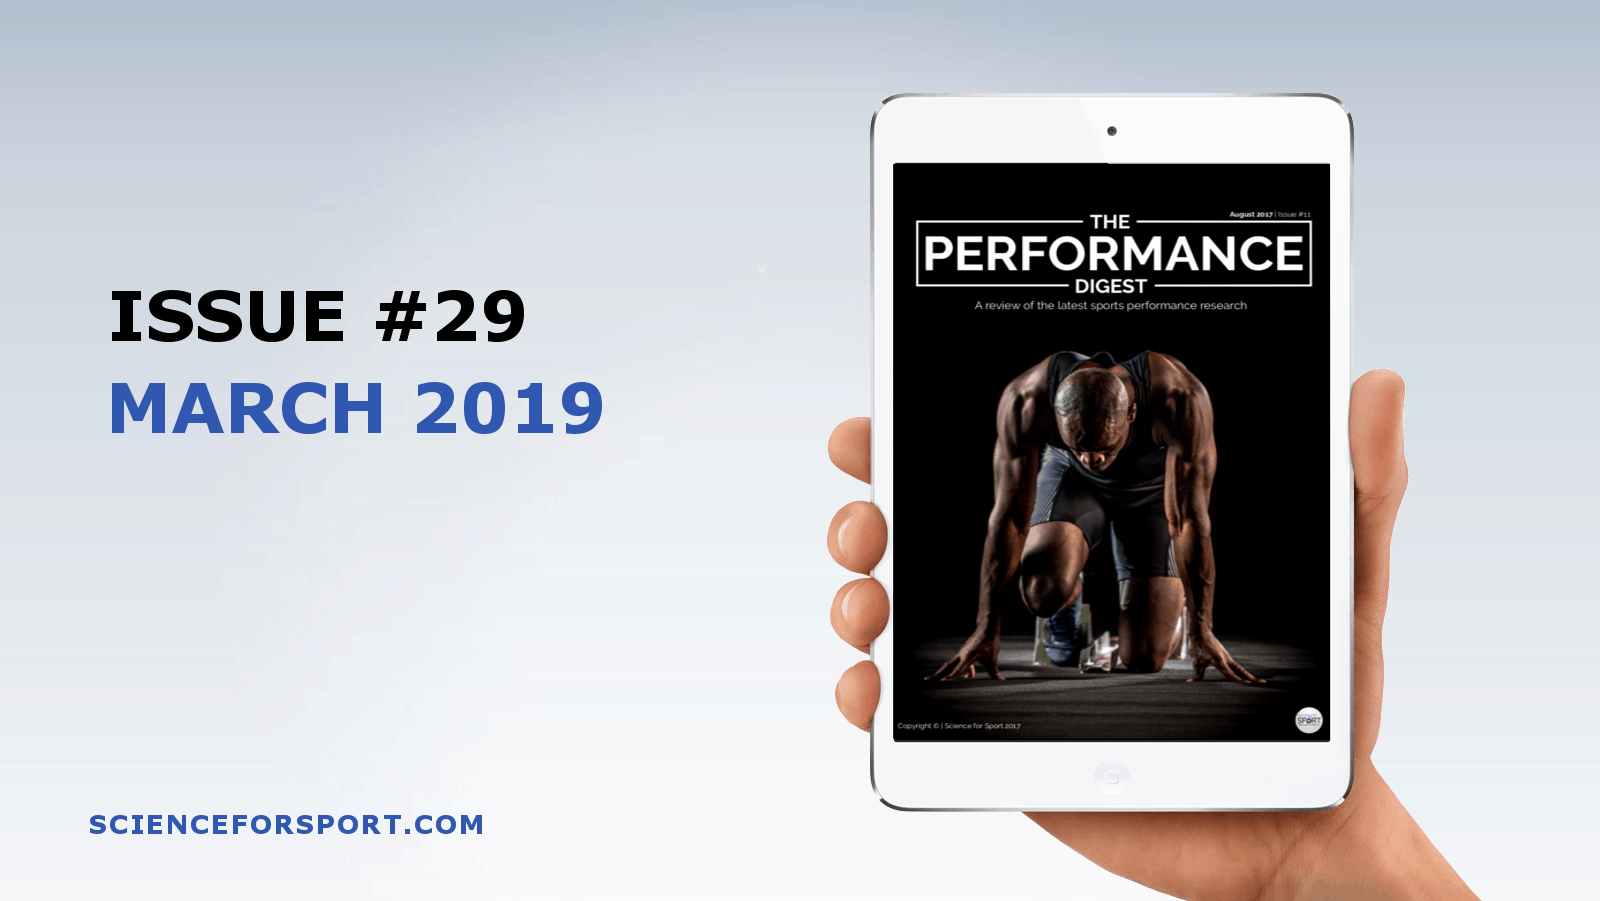 Performance Digest - Science for Sport